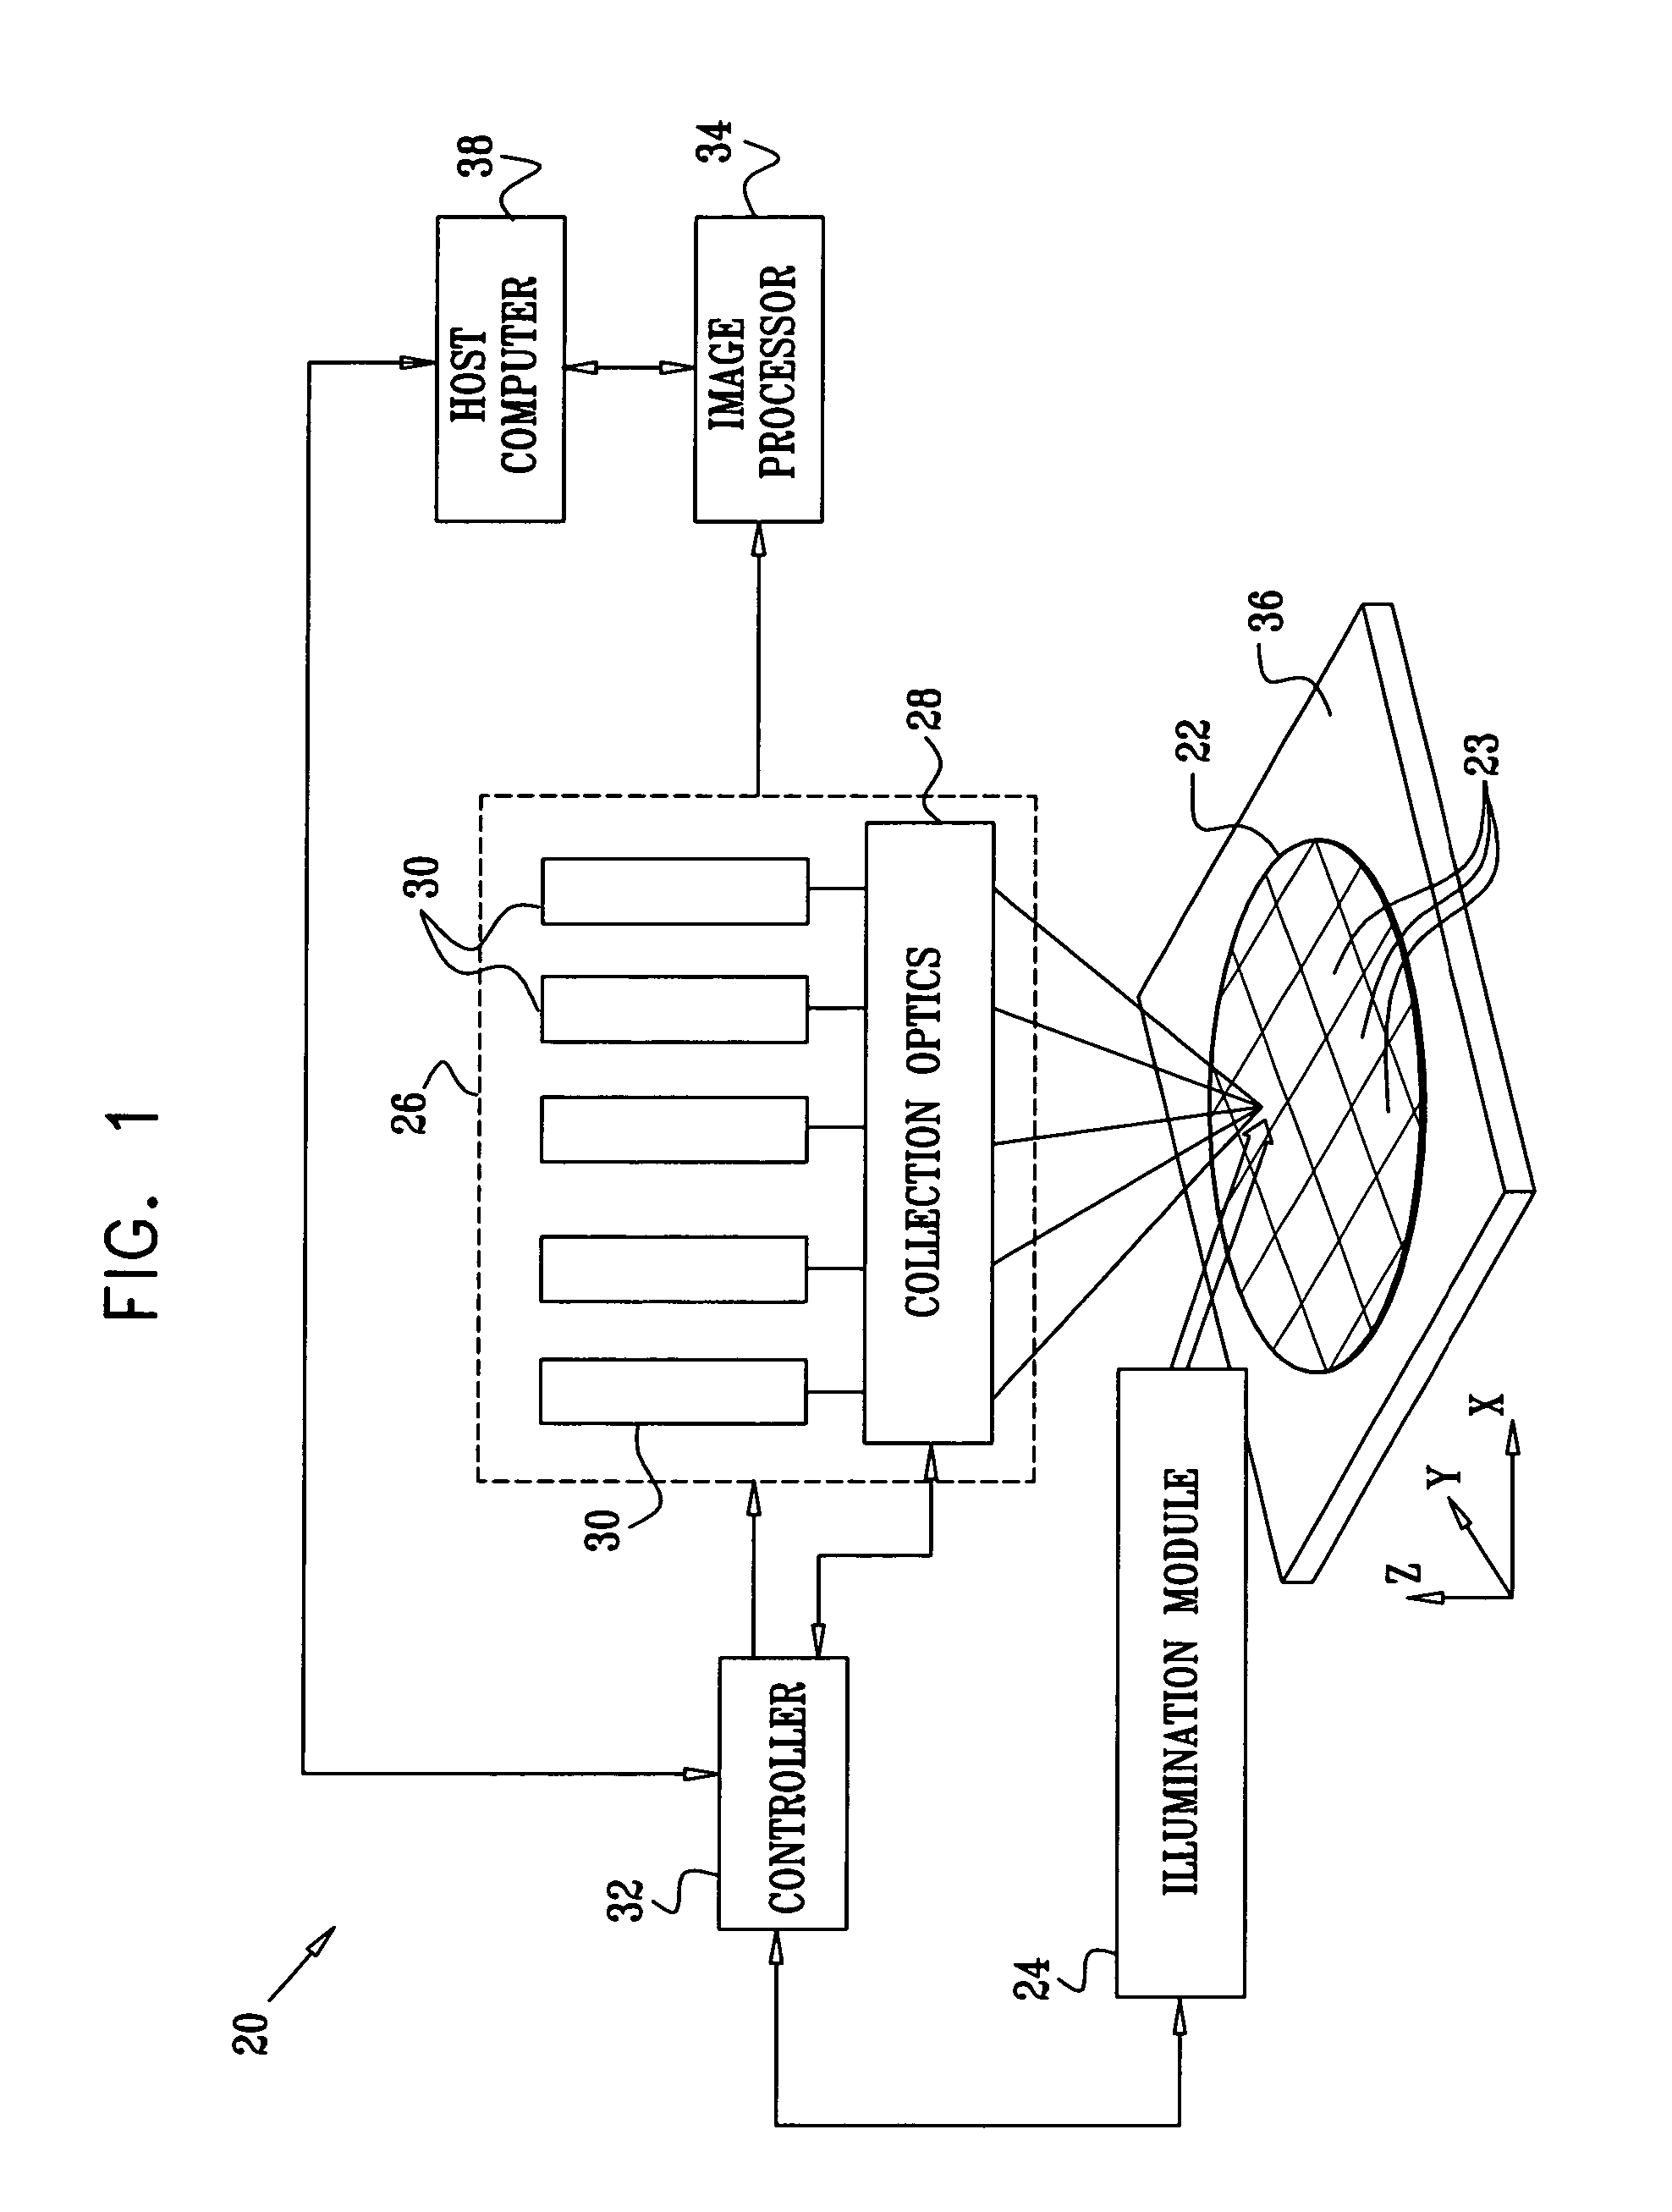 Optical inspection with alternating configurations